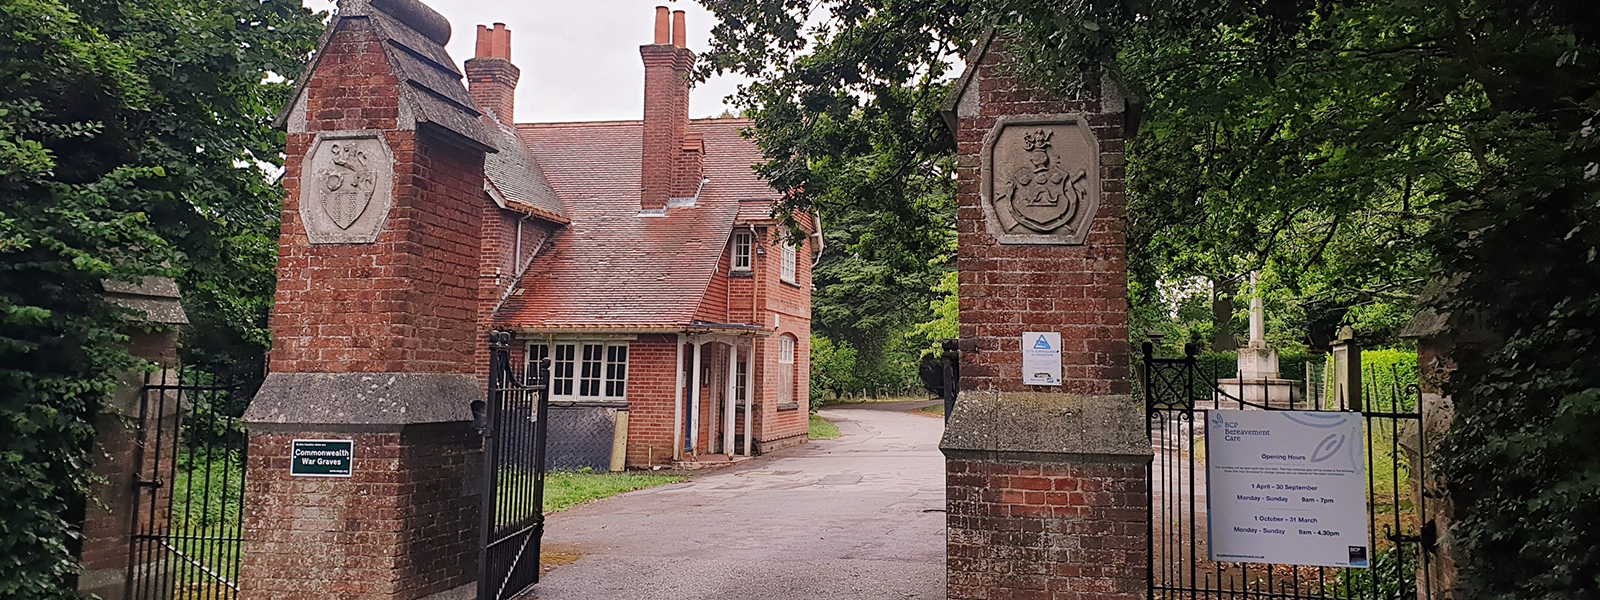 The entrance to Poole cemetery